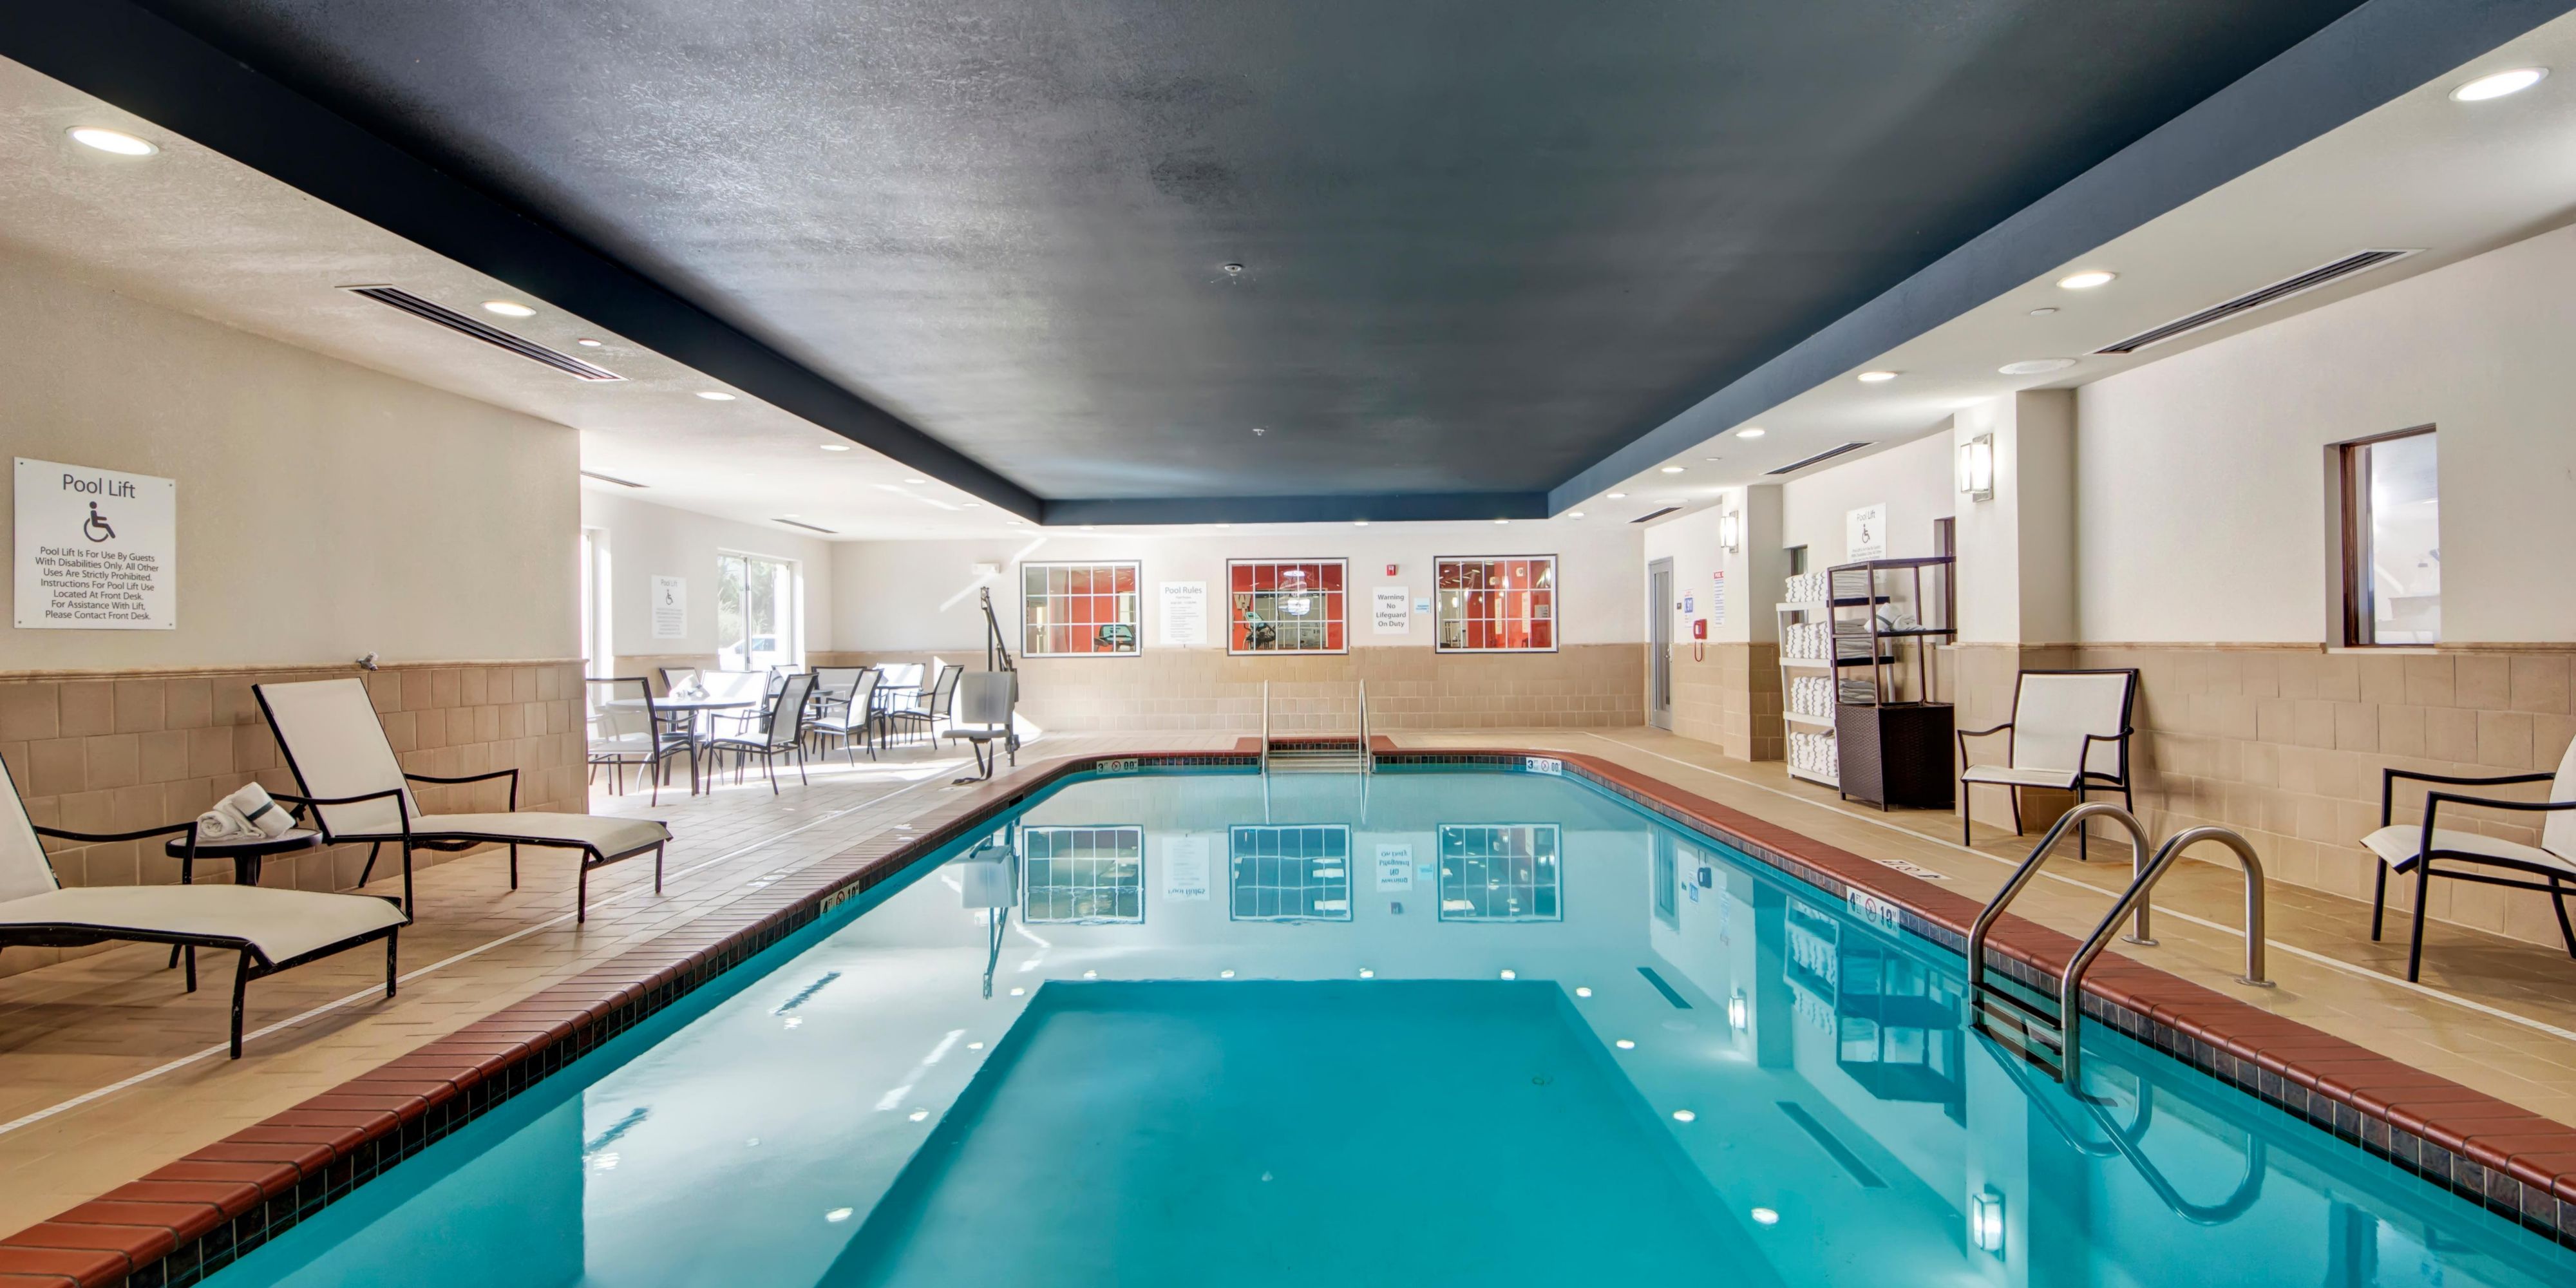 Don't skip a beat on your workout routine when you travel.  Take a few laps in our indoor heated pool